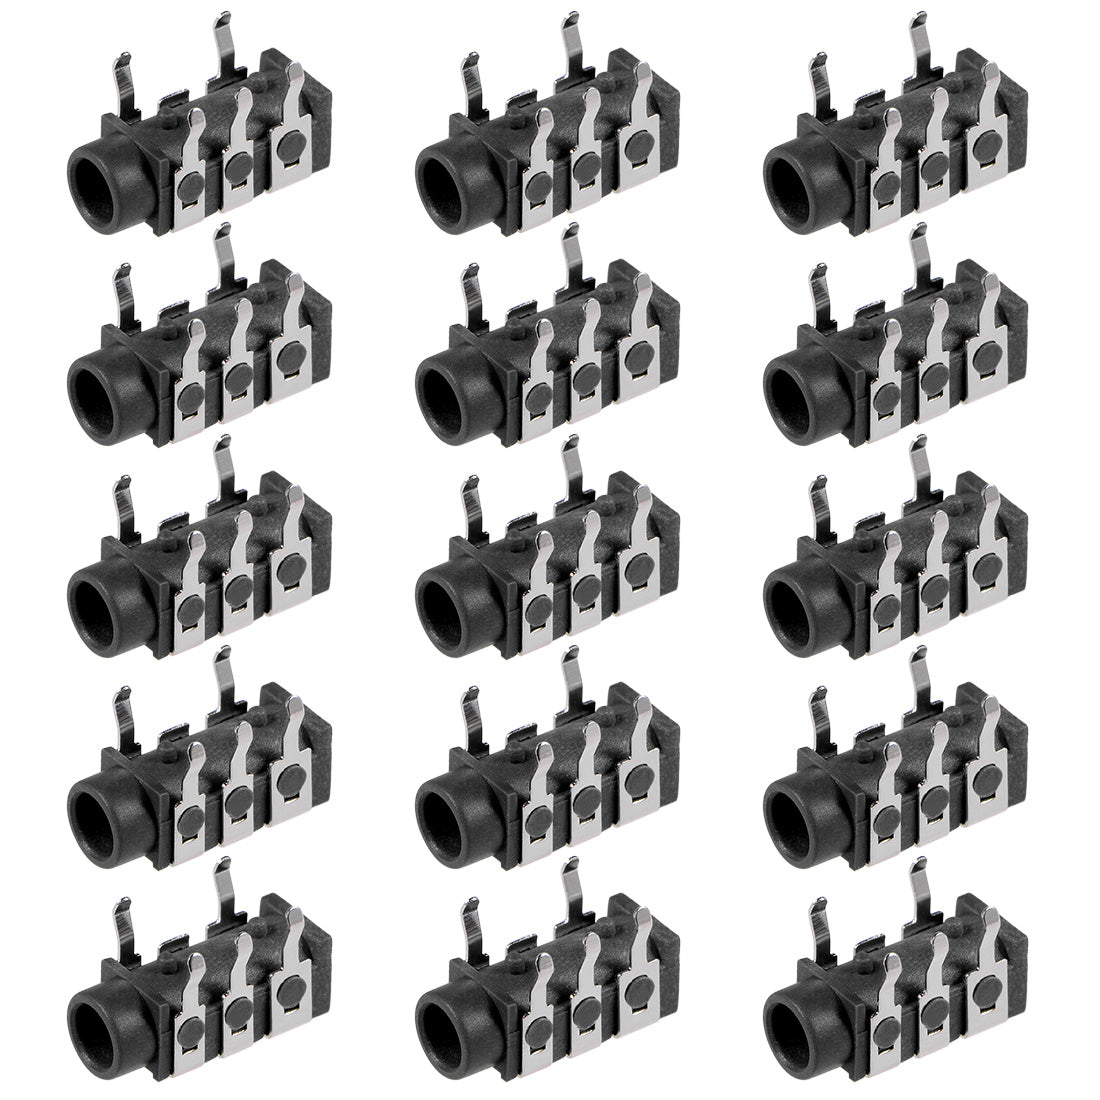 uxcell Uxcell 15Pcs PCB Mount 3.5mm 5 Pin Socket Headphone Stereo Jack Audio Video Connector Black PJ-313B